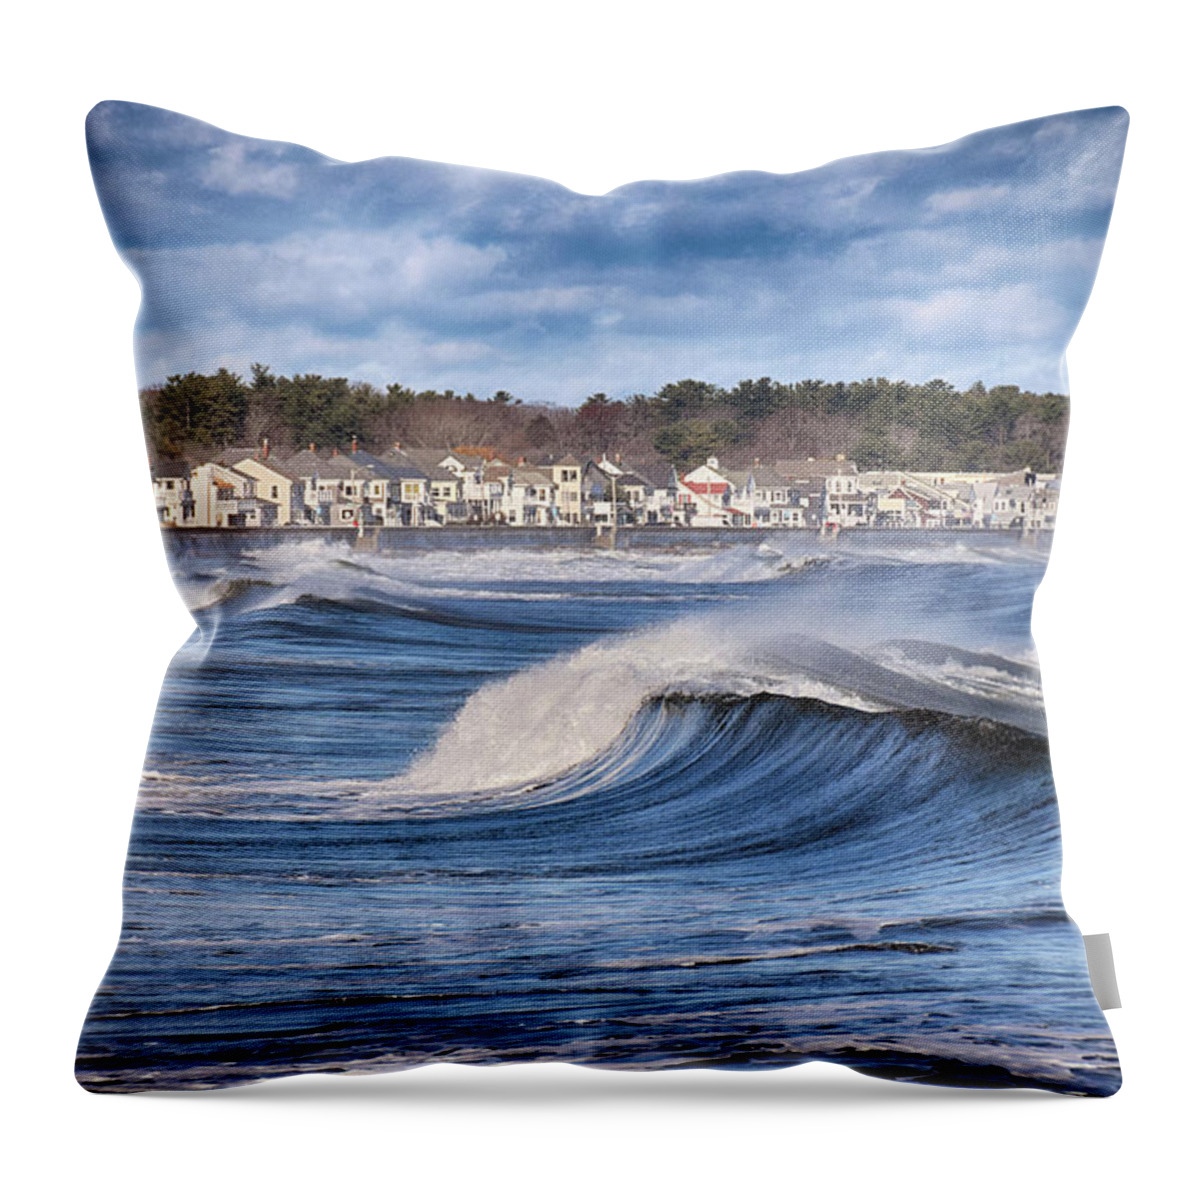 New Hampshire Throw Pillow featuring the photograph Wild Seas by Tricia Marchlik